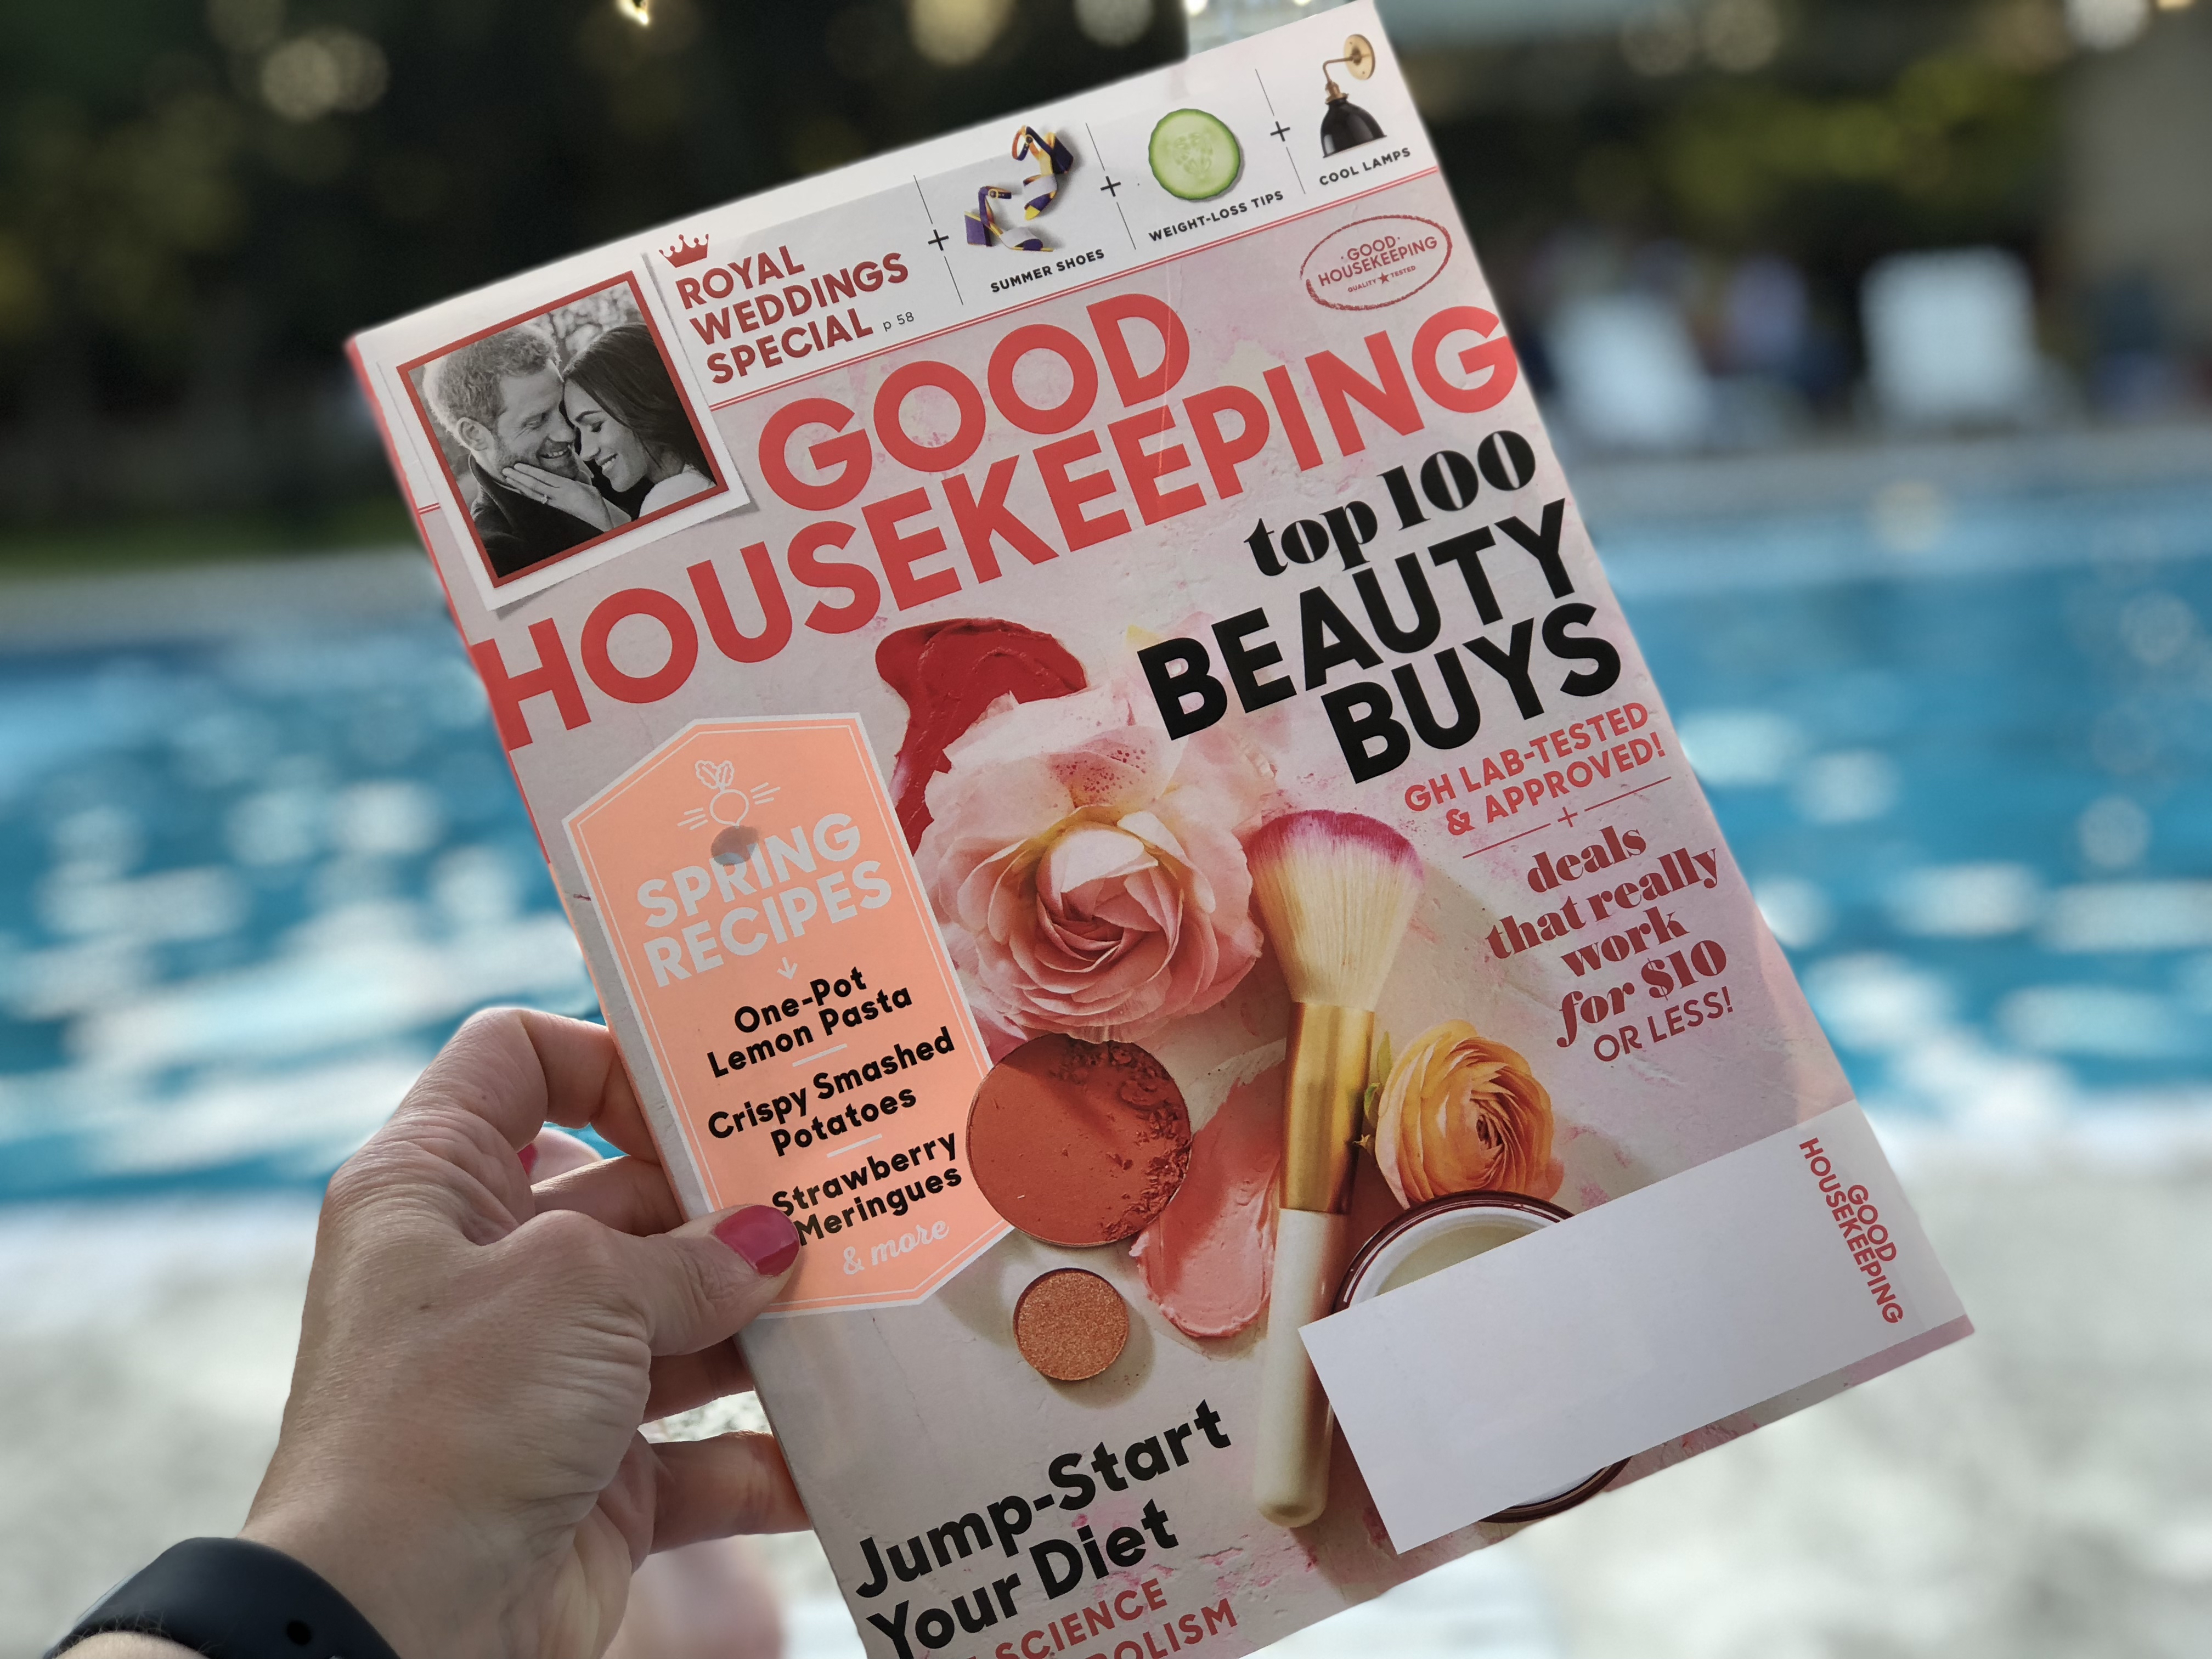 Get no-cost magazine subscriptions to people, real simple, and o, or this Good Housekeeping magazine.